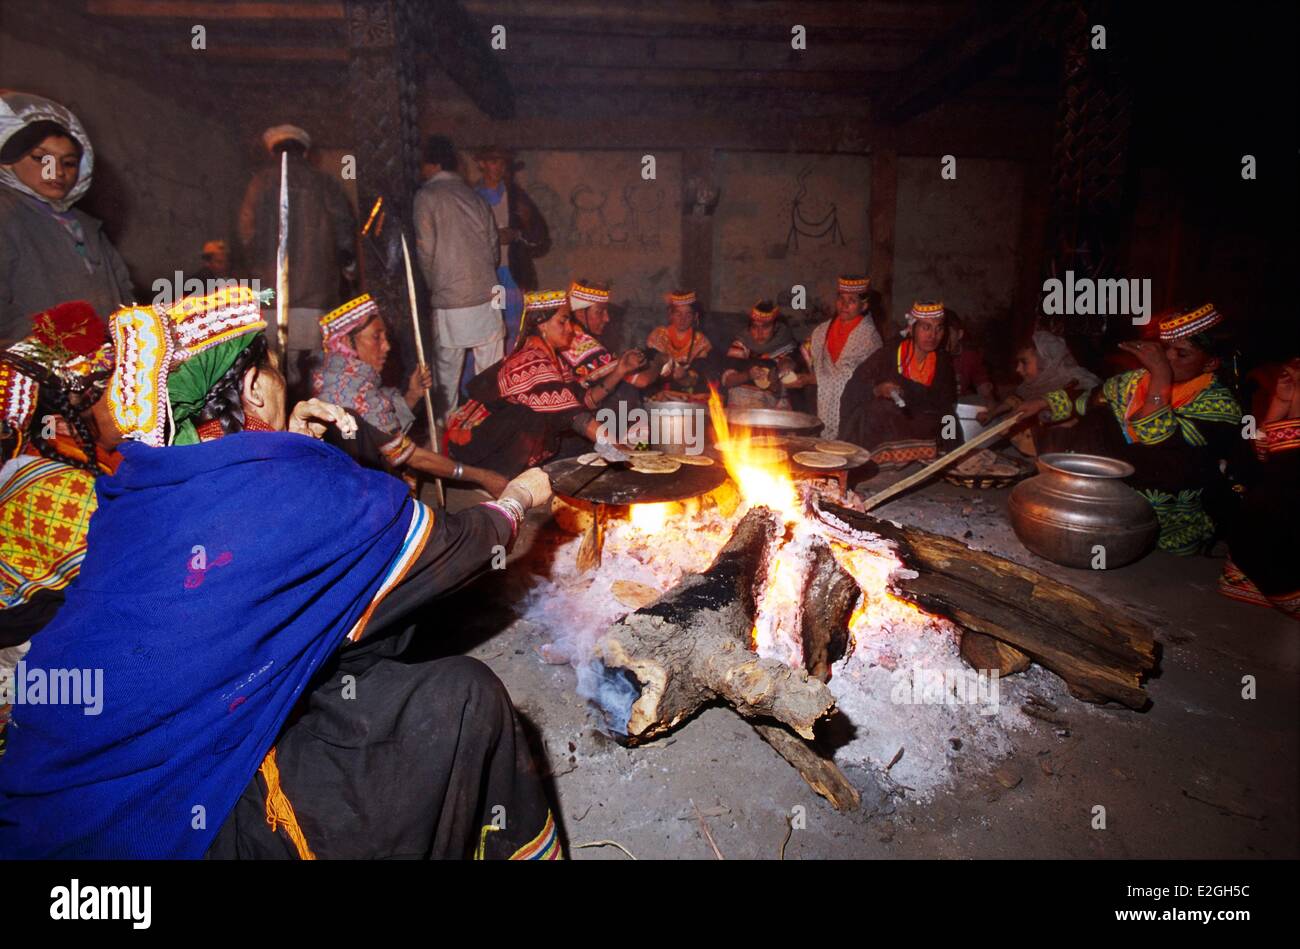 Pakistan Khyber Pakhtunkhwa Kalash valleys Bumburet valley Krakal village preparation of a group meal in Jestak Han house of lineages during celebrations of Chaumos winter solstice festival Stock Photo